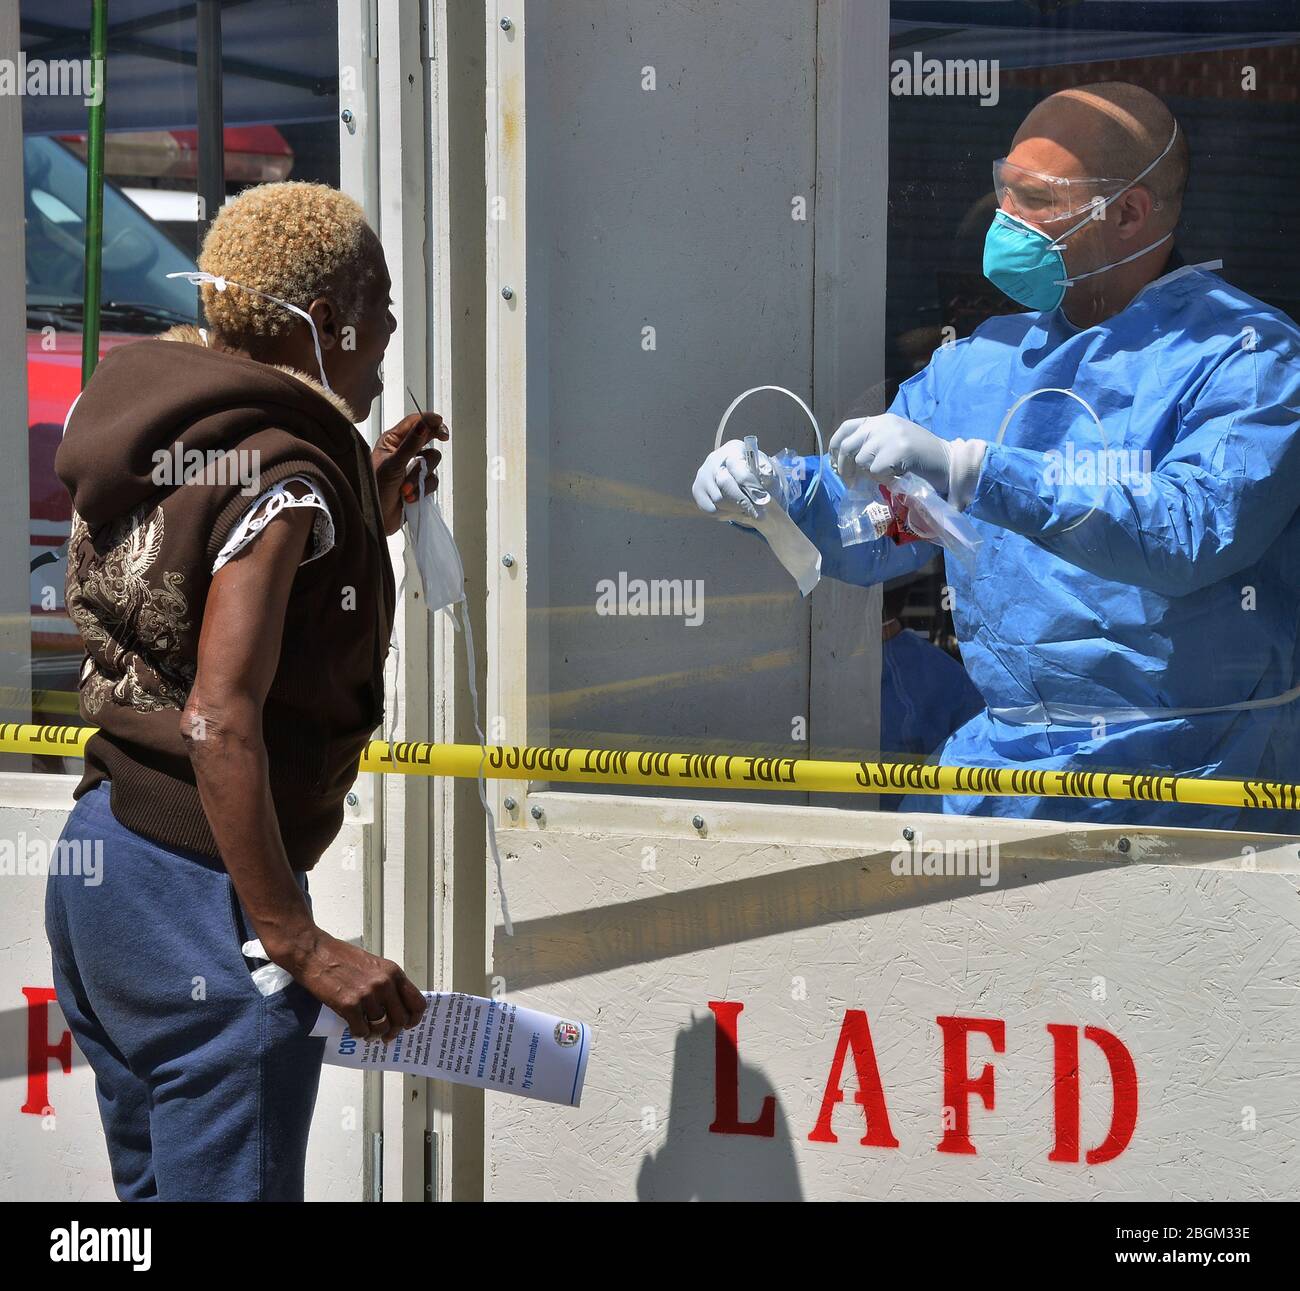 A woman administers a COVID-19 self-testing kit at a LA Fire Department pop-up testing station, where workers in hazmat suits handed out testing swabs to the homeless from behind a protective window in the Skid row section of Los Angeles on Tuesday, April 21, 2020. Forty-three more people have tested positive for the coronavirus at the Union Rescue Mission, Los Angeles' oldest and largest homeless shelter. The sudden spike in cases comes despite the extreme precautions the shelter has been taking to prevent such an outbreak. Photo by Jim Ruymen/UPI Stock Photo